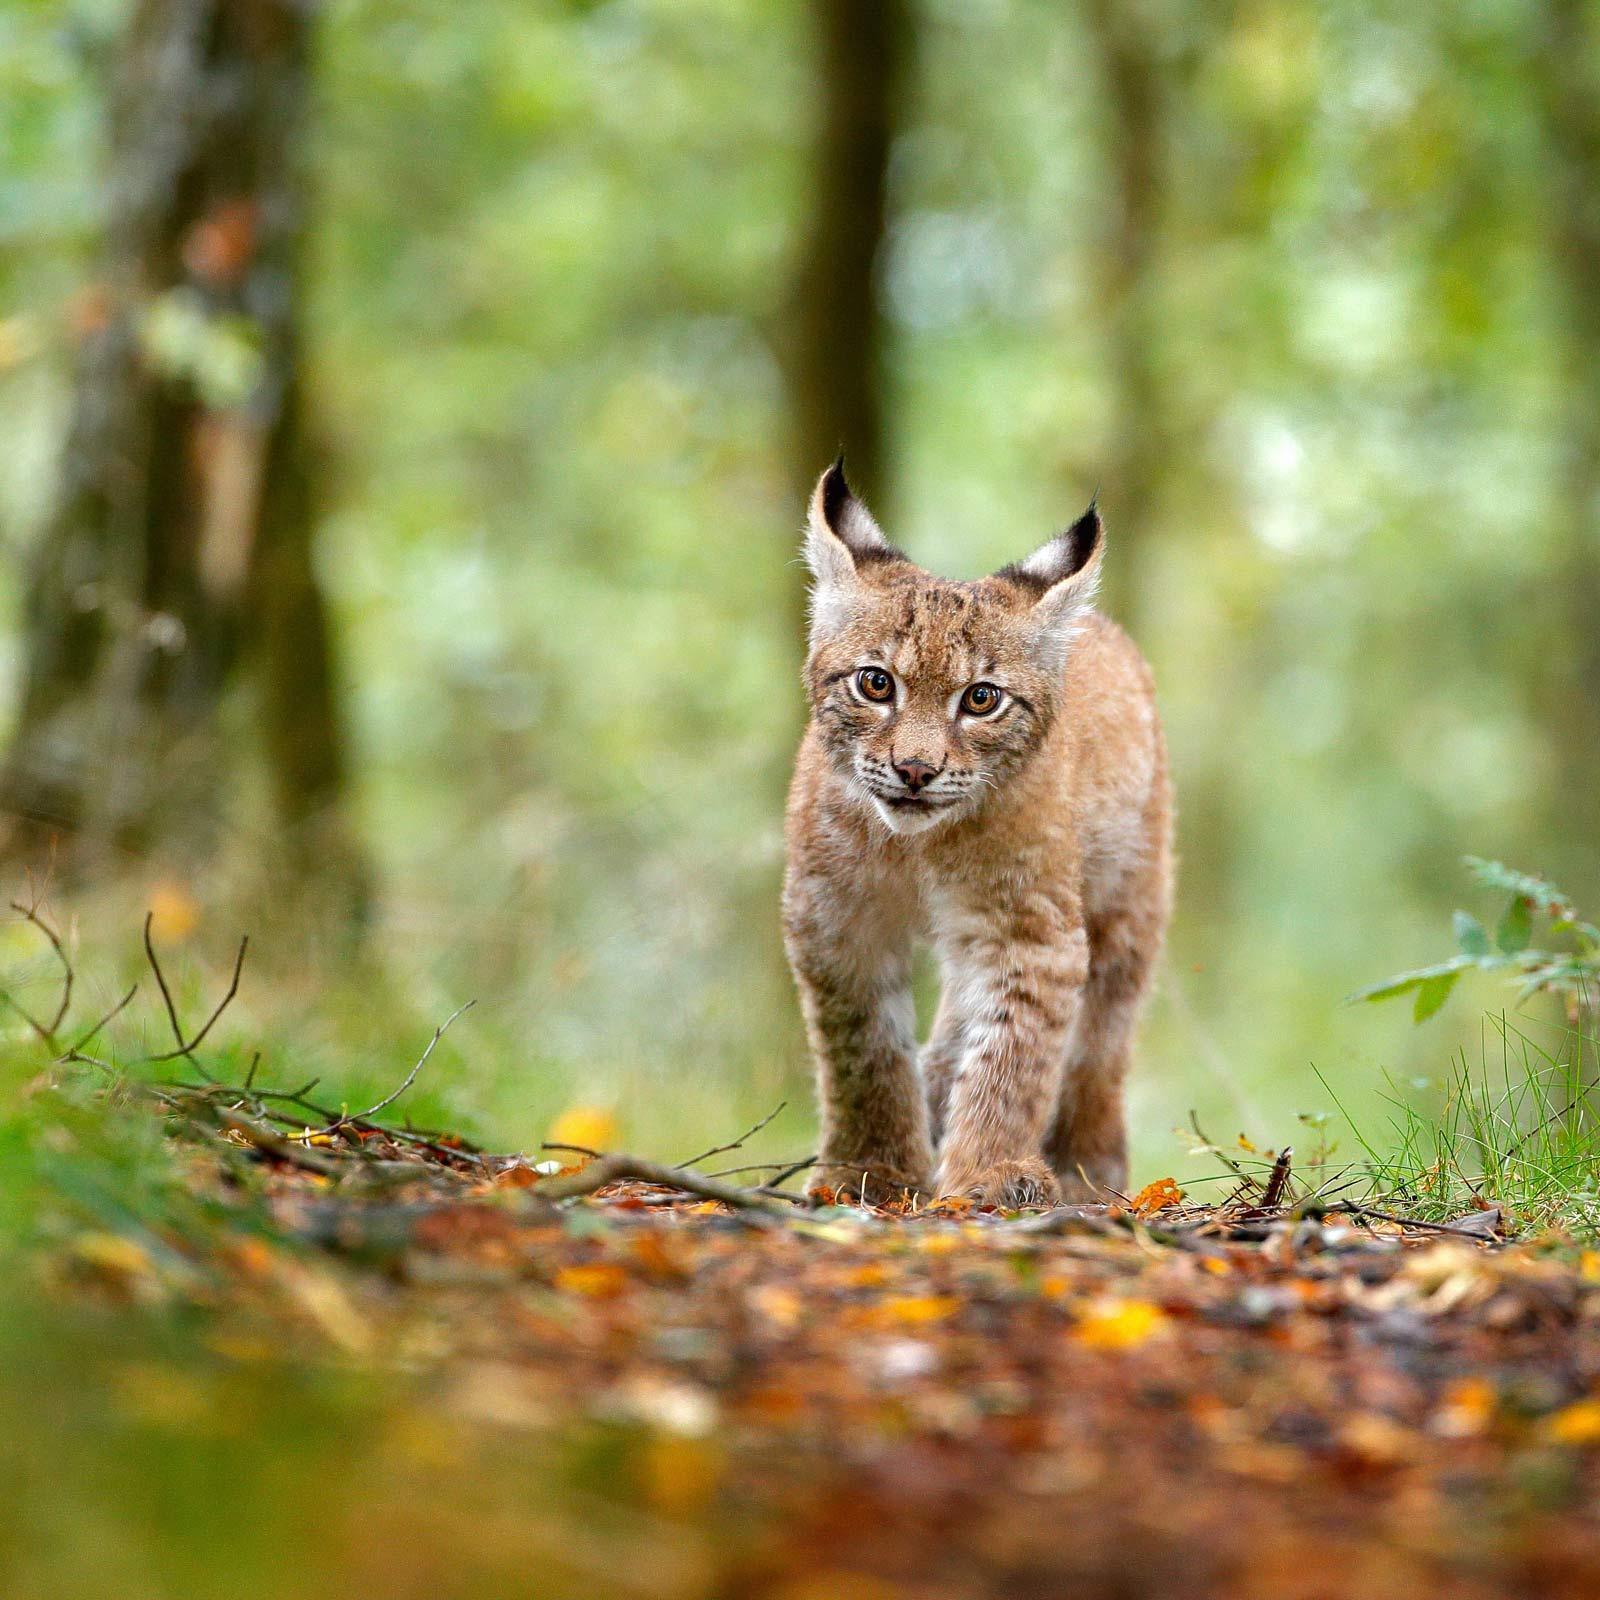 A young lynx is walking along a game trail in the forest.